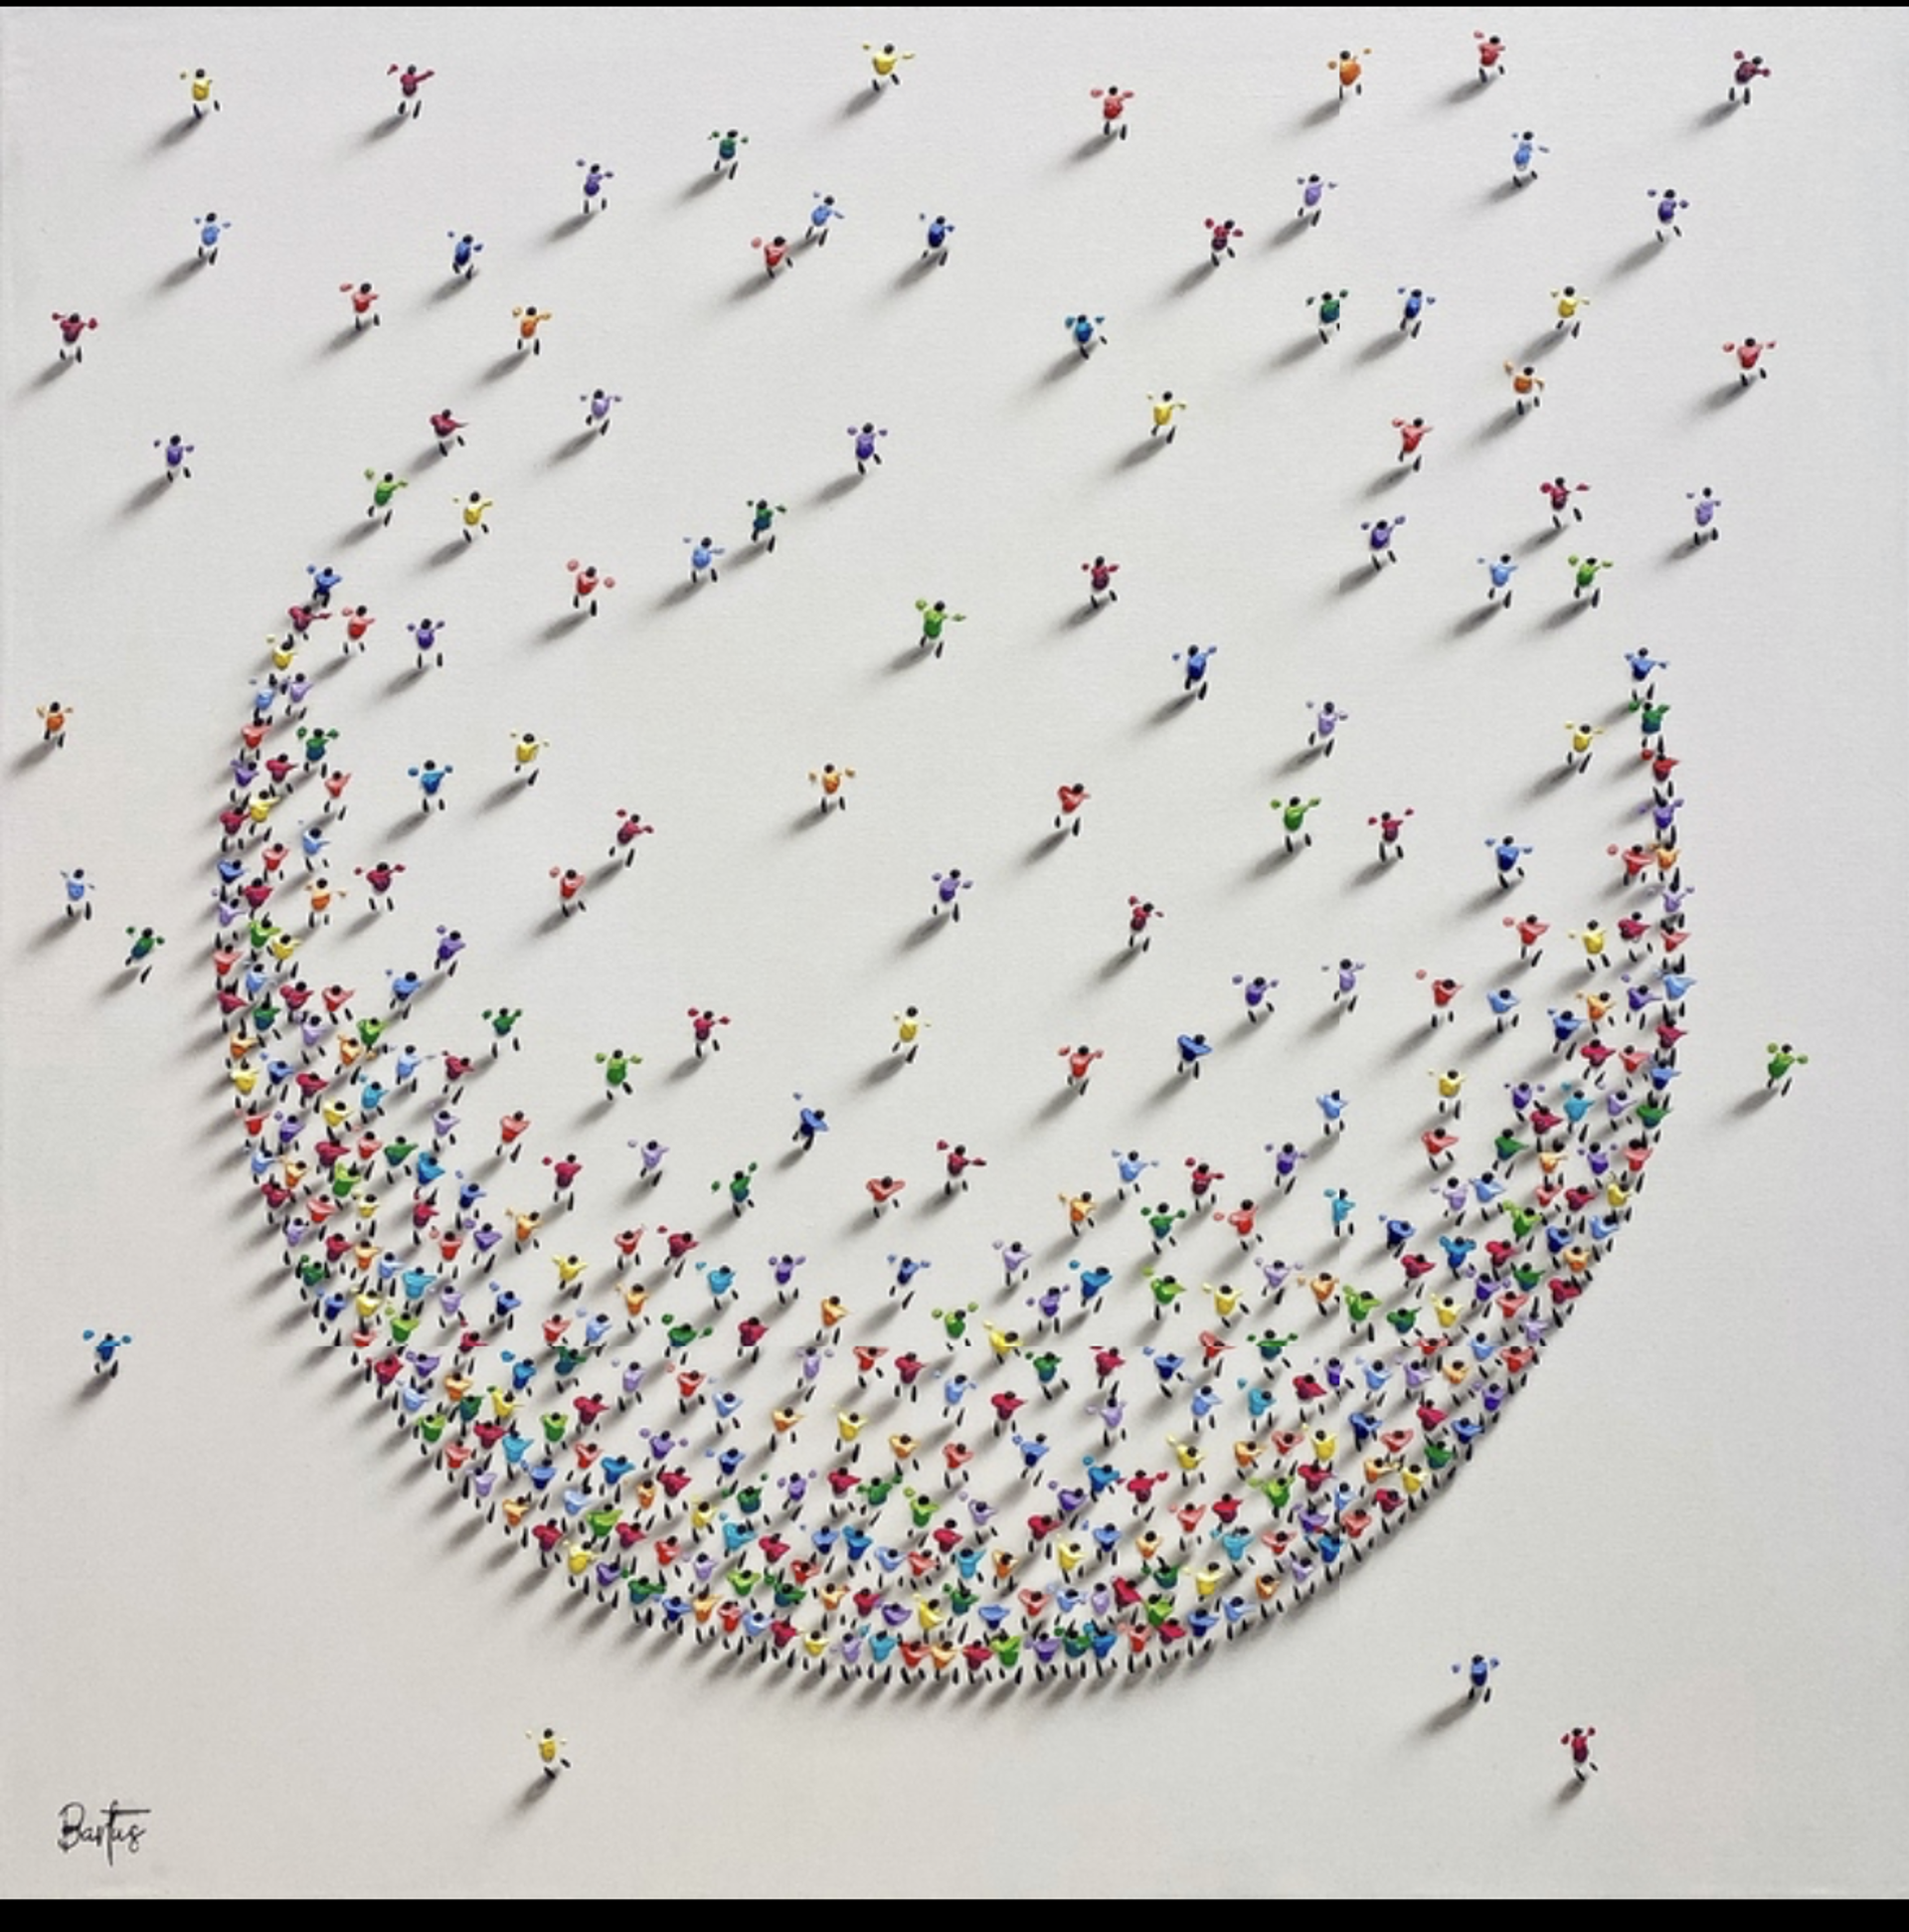 CIRCLE with a few bikes Stark Commission by Francisco Bartus